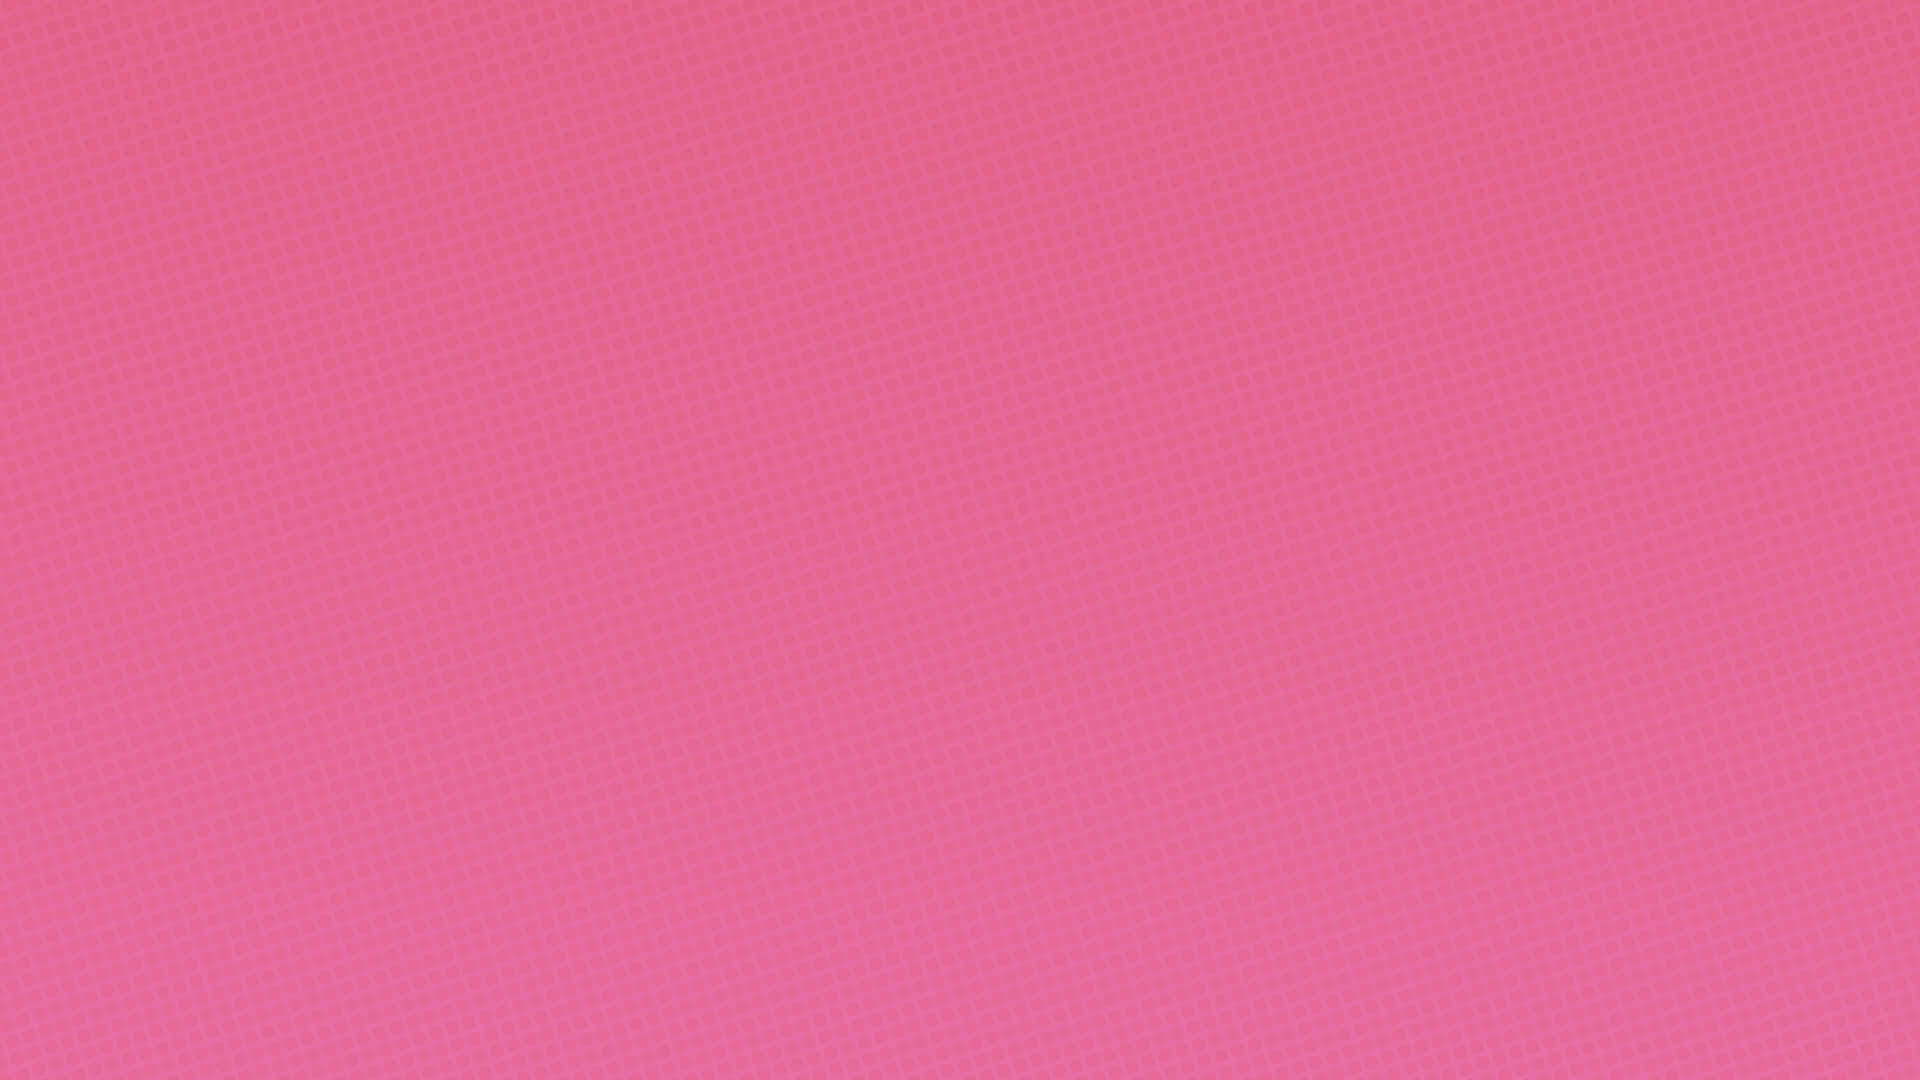 A Vibrant Simple Pink Background